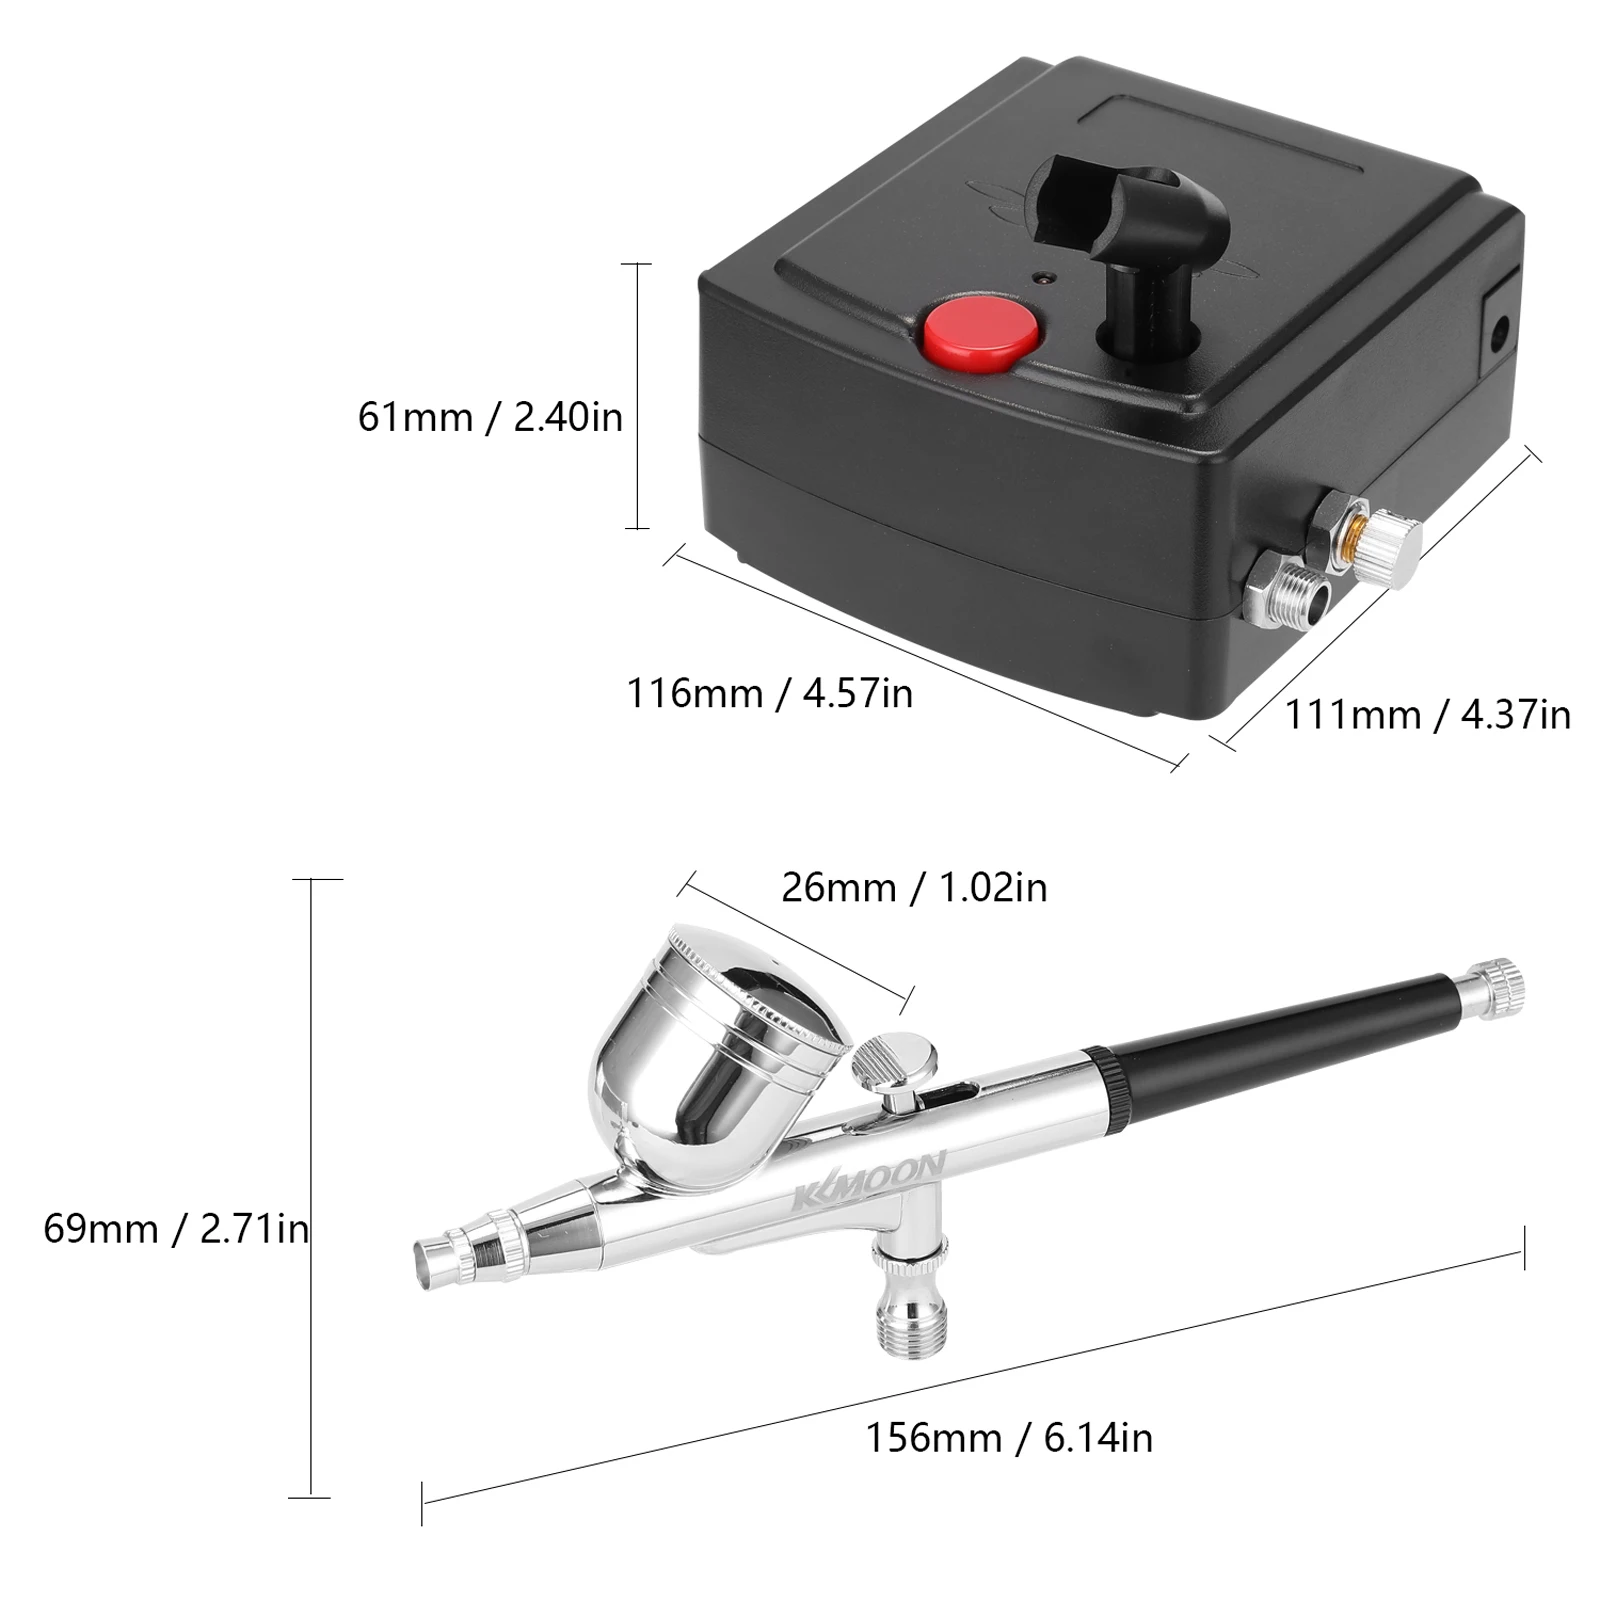 

Professional Airbrush Set for Model Making Art Painting with Air Compressor+Power Adapter+Airbrush+Airbrush Holder+0.2mmneedle